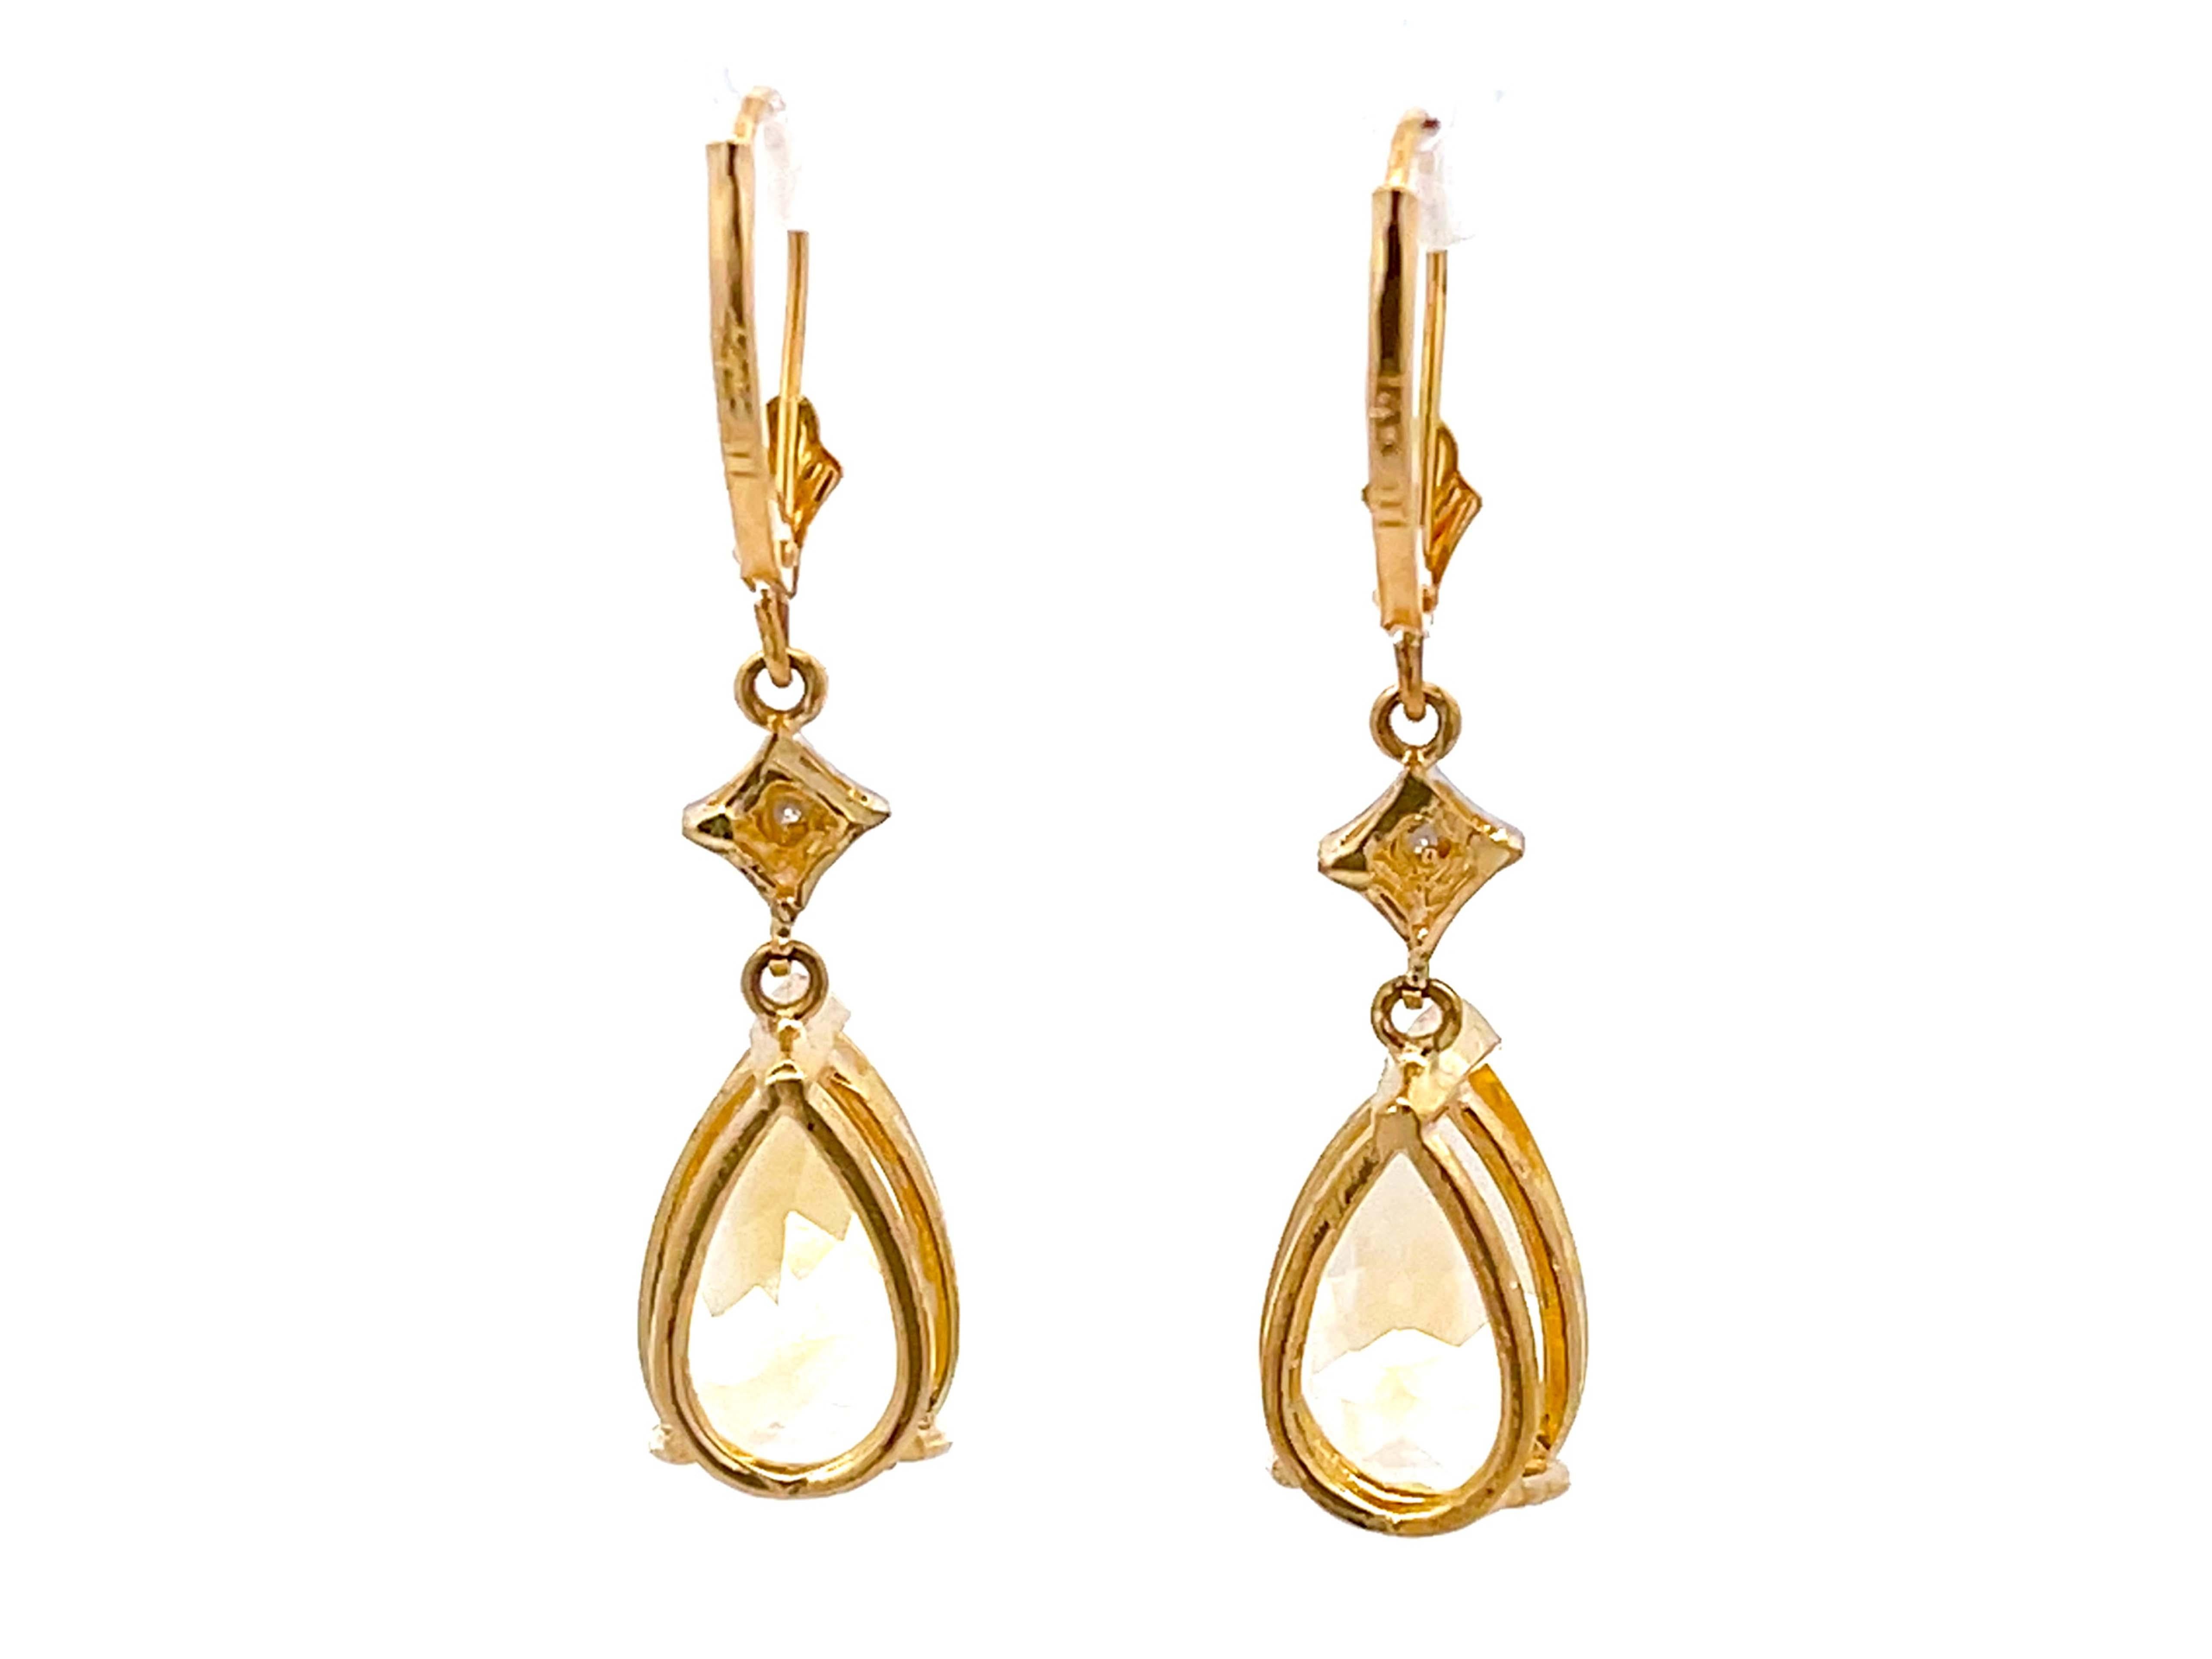 Pear Shaped Yellow Topaz Drop Diamond Dangly Earrings in 14k Yellow Gold In Excellent Condition For Sale In Honolulu, HI